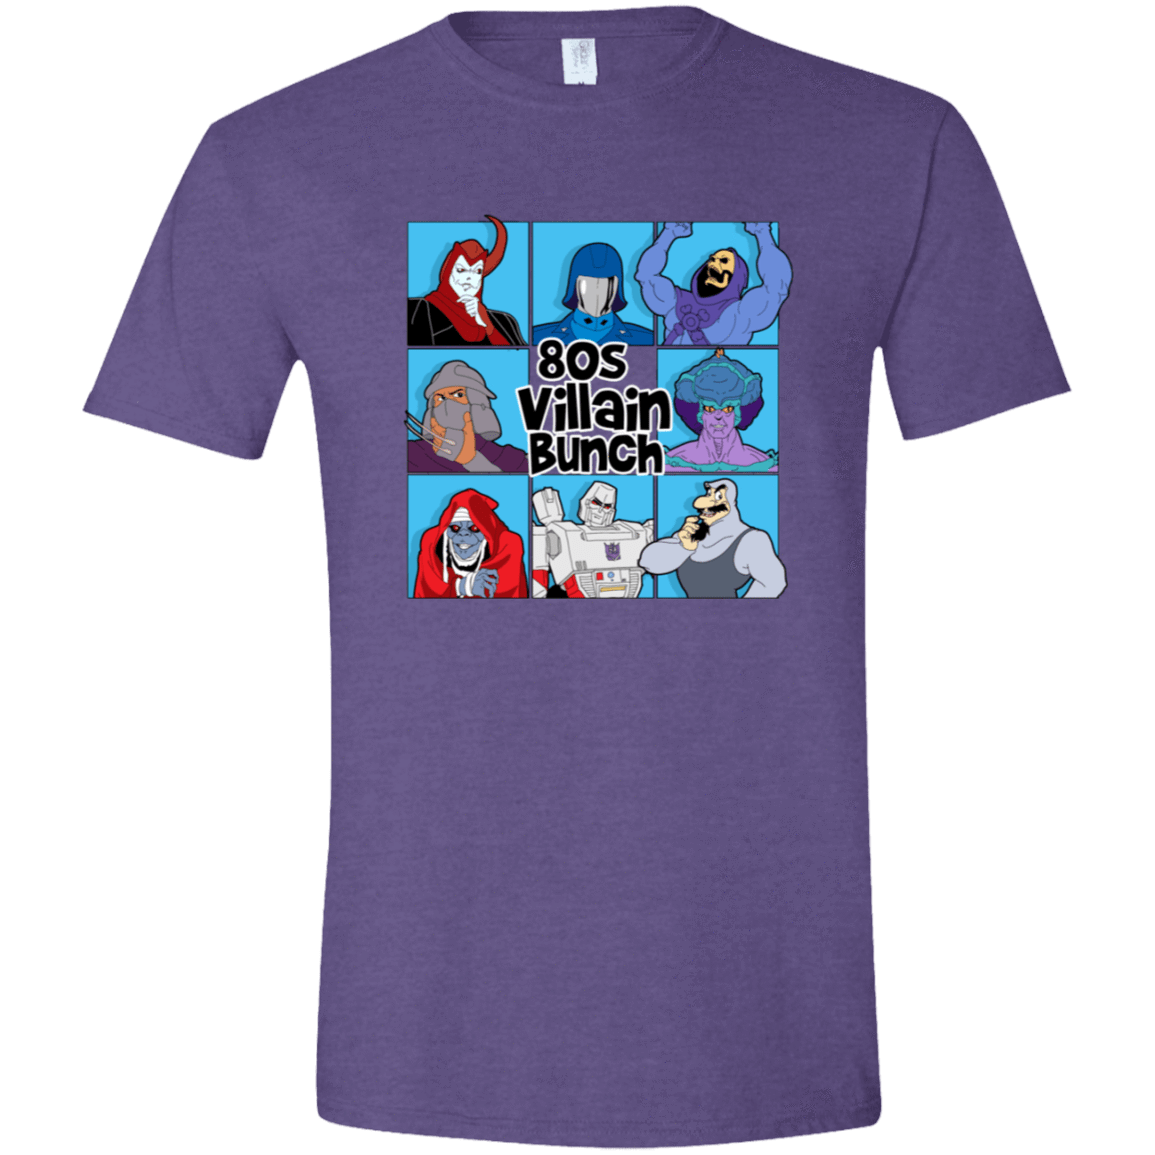 T-Shirts Heather Purple / S 80s Villians Bunch Men's Semi-Fitted Softstyle